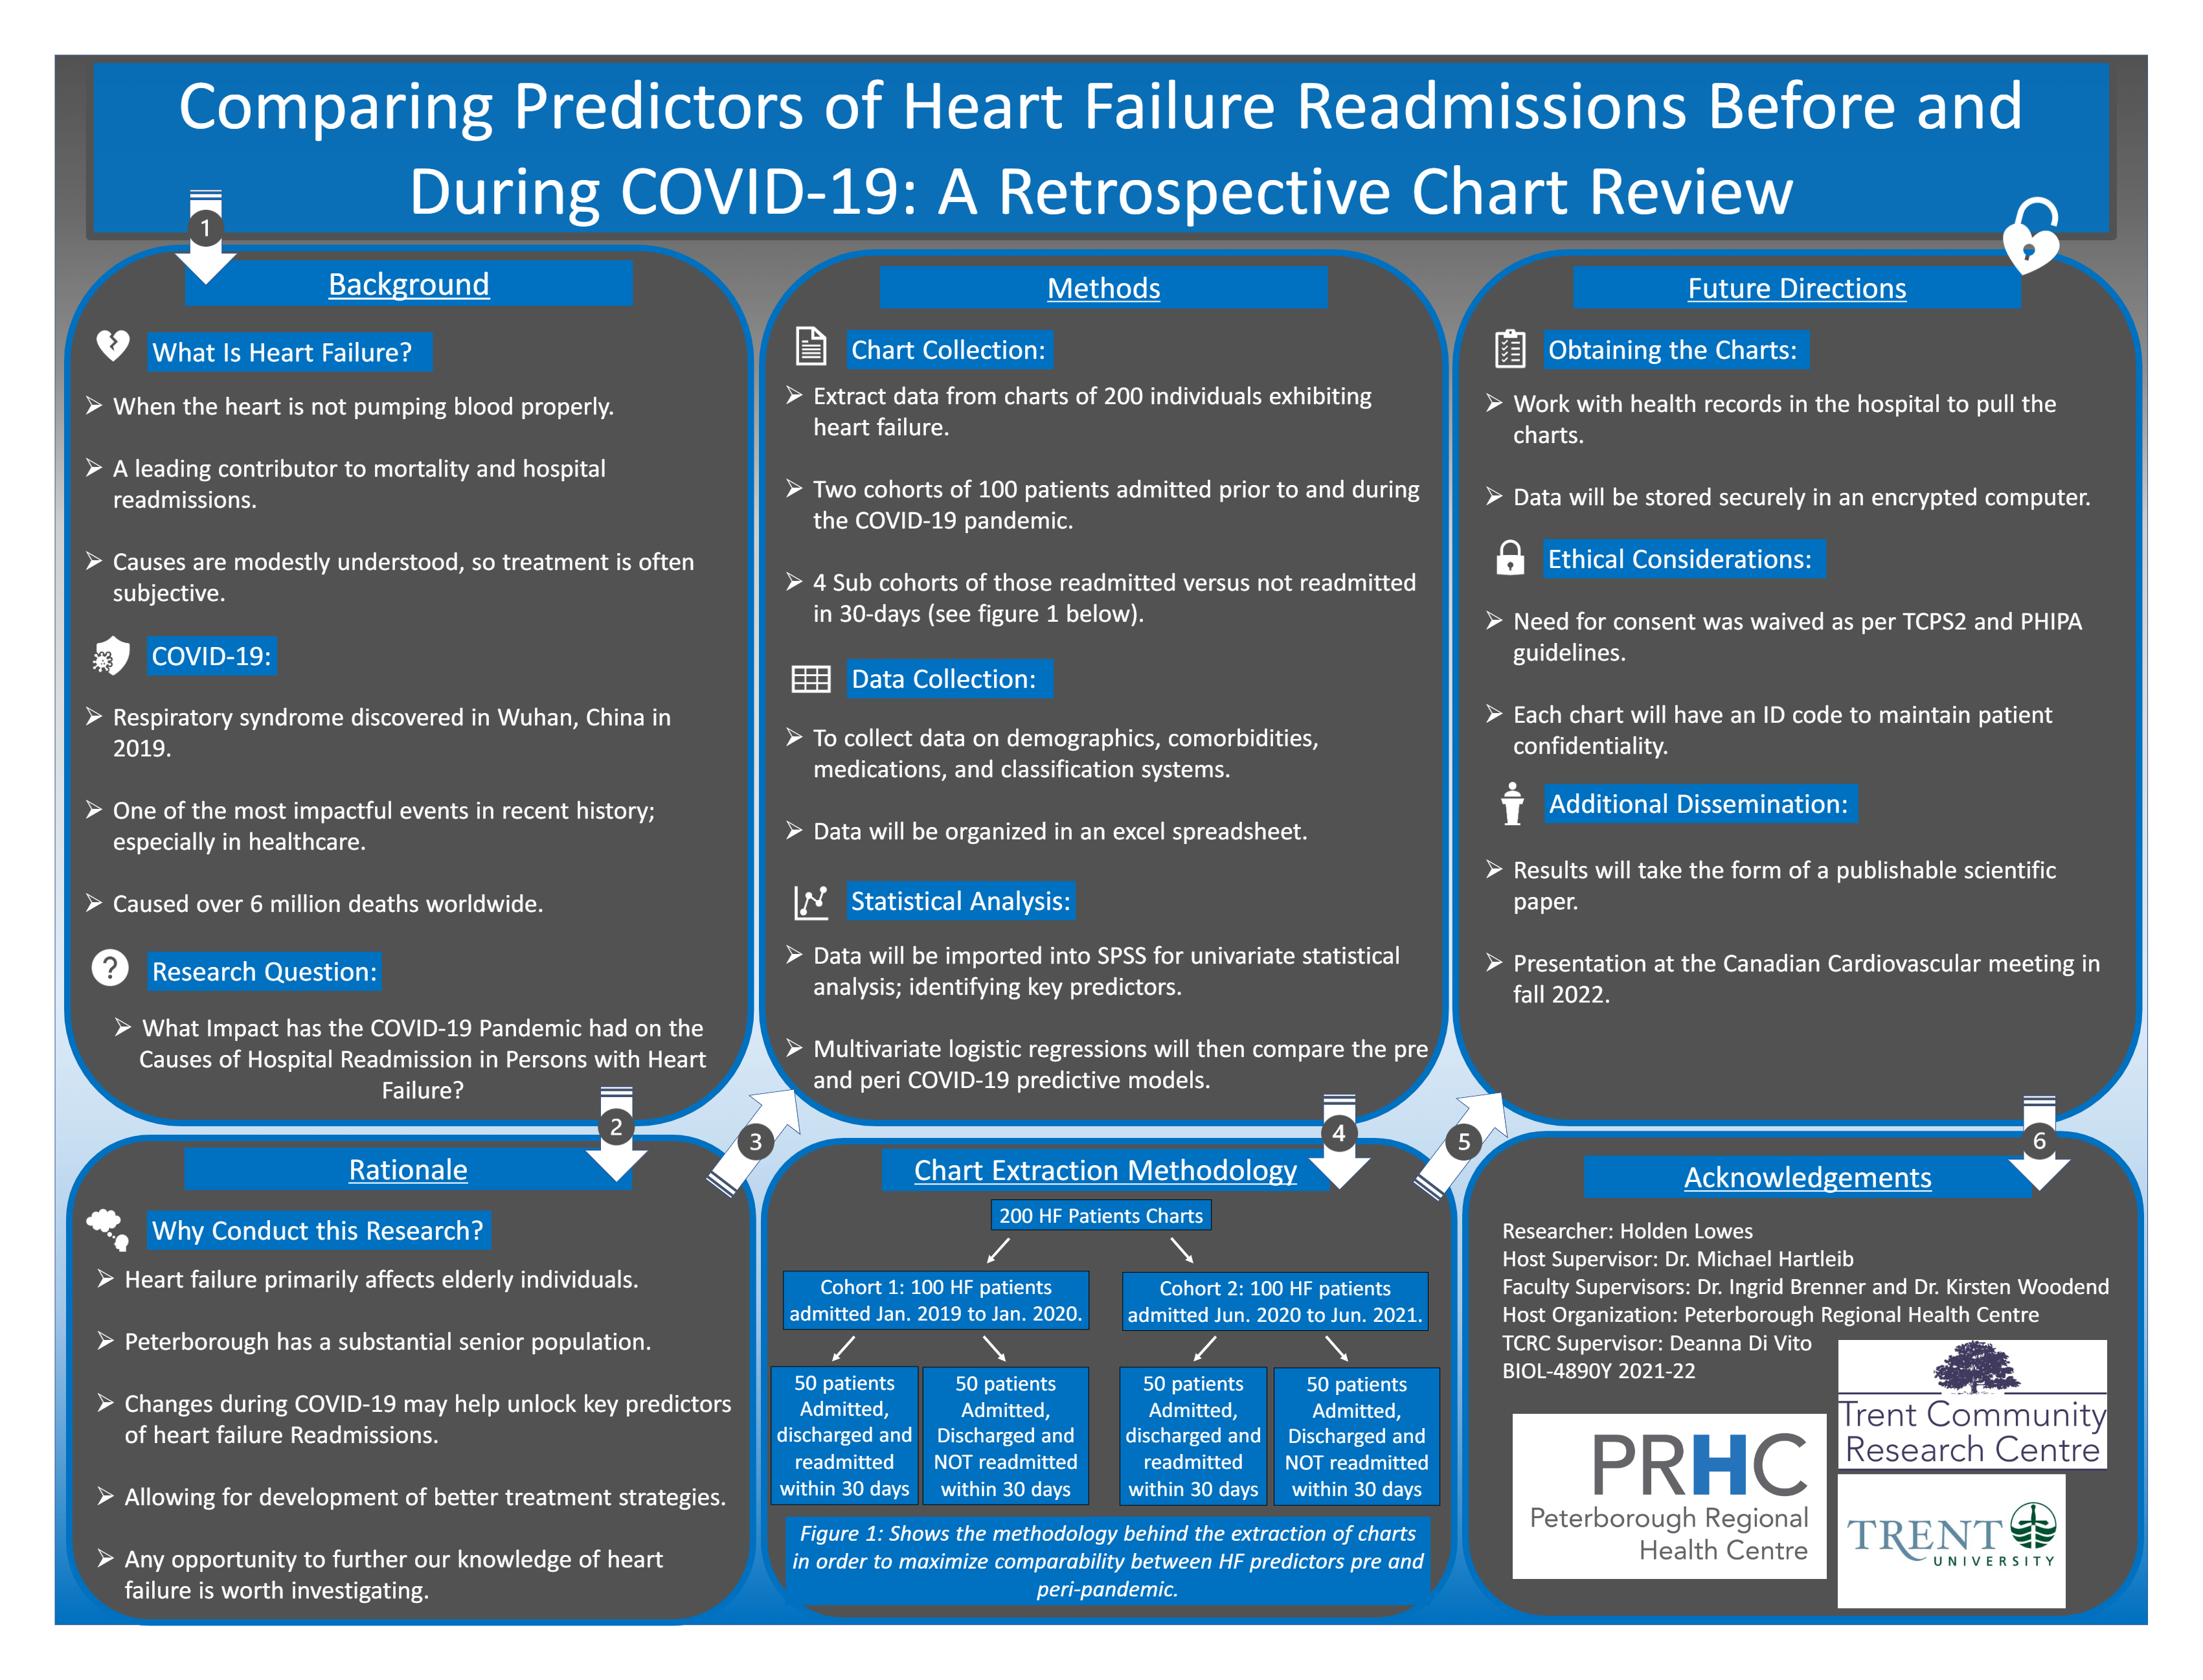 #5053 – Patterns of Heart Failure Readmissions During the COVID-19 Era